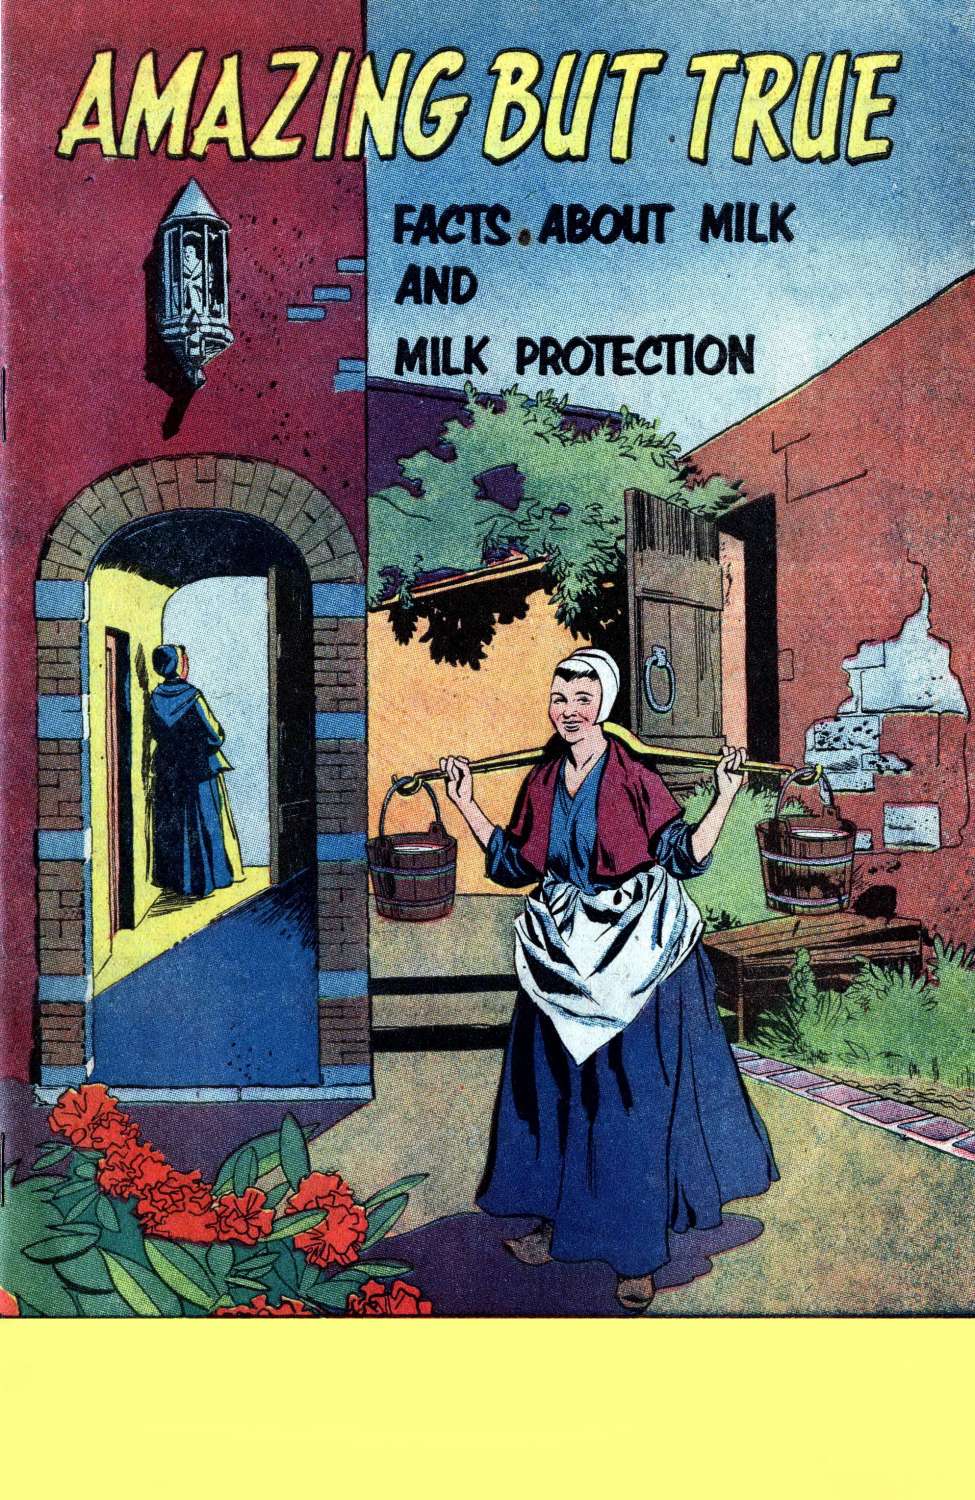 Comic Book Cover For Amazing But True - Facts About Milk and Milk Protection